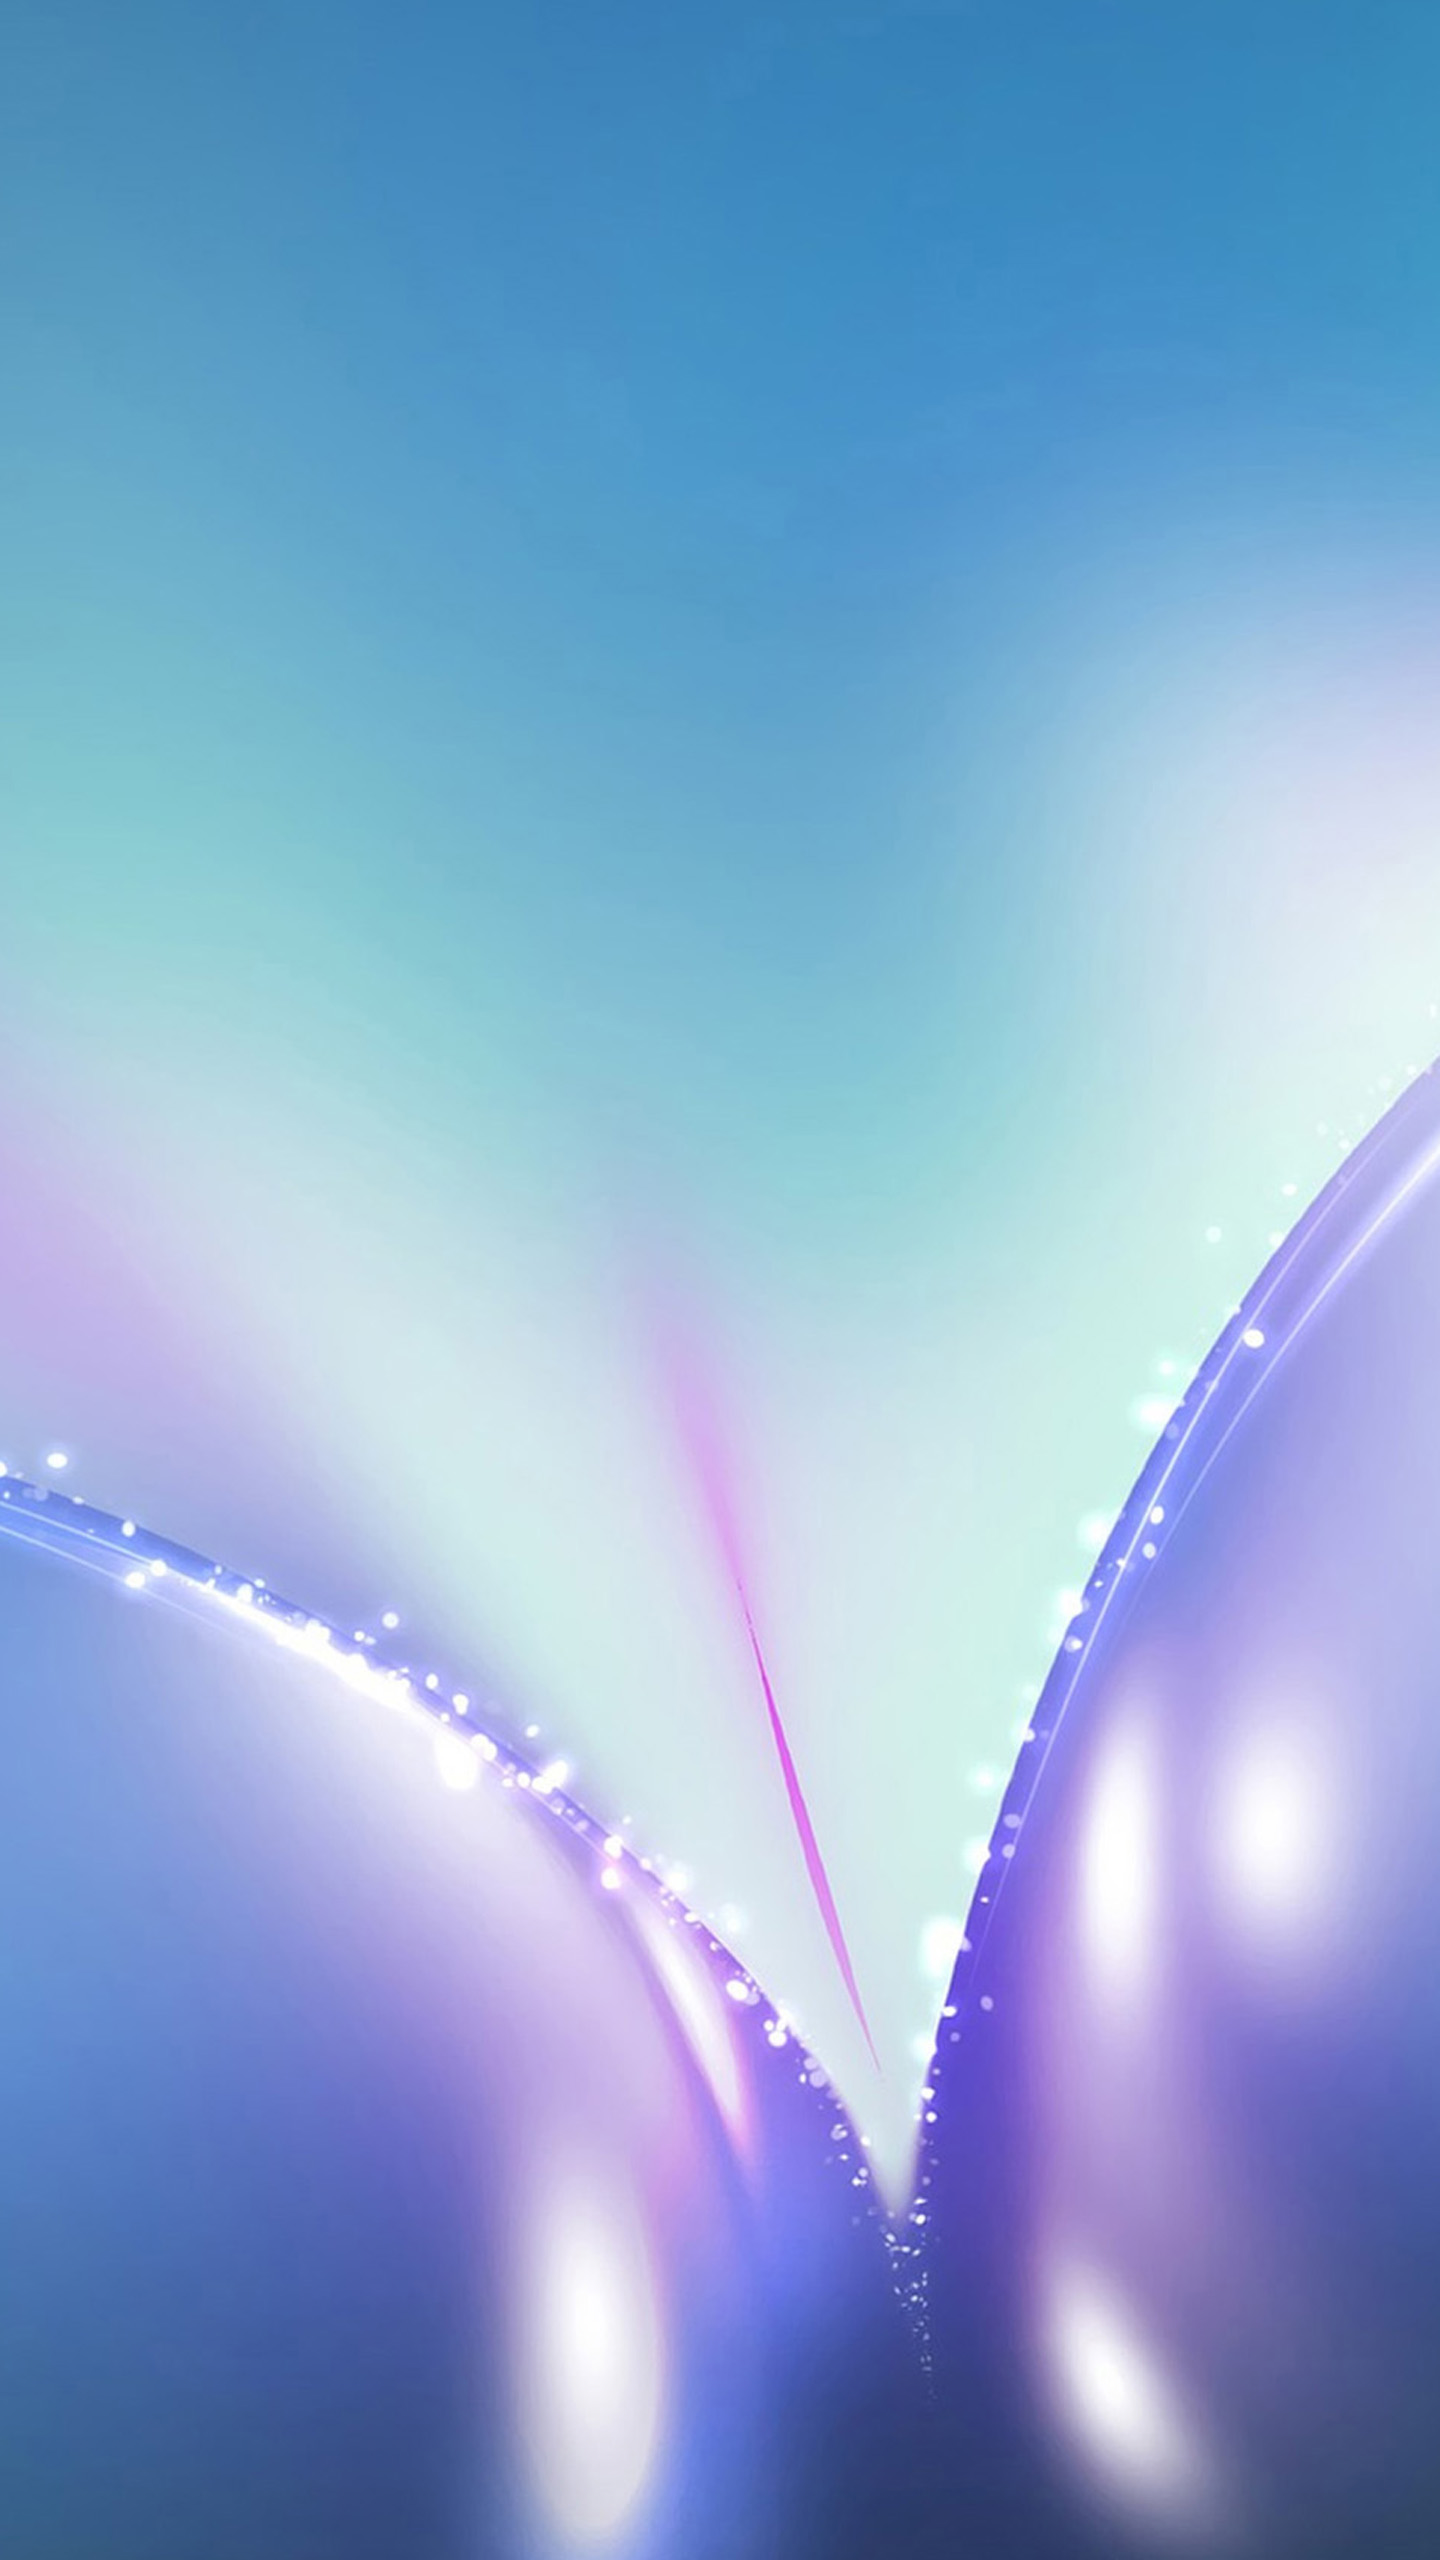 galaxy s6 animated wallpaper home screen